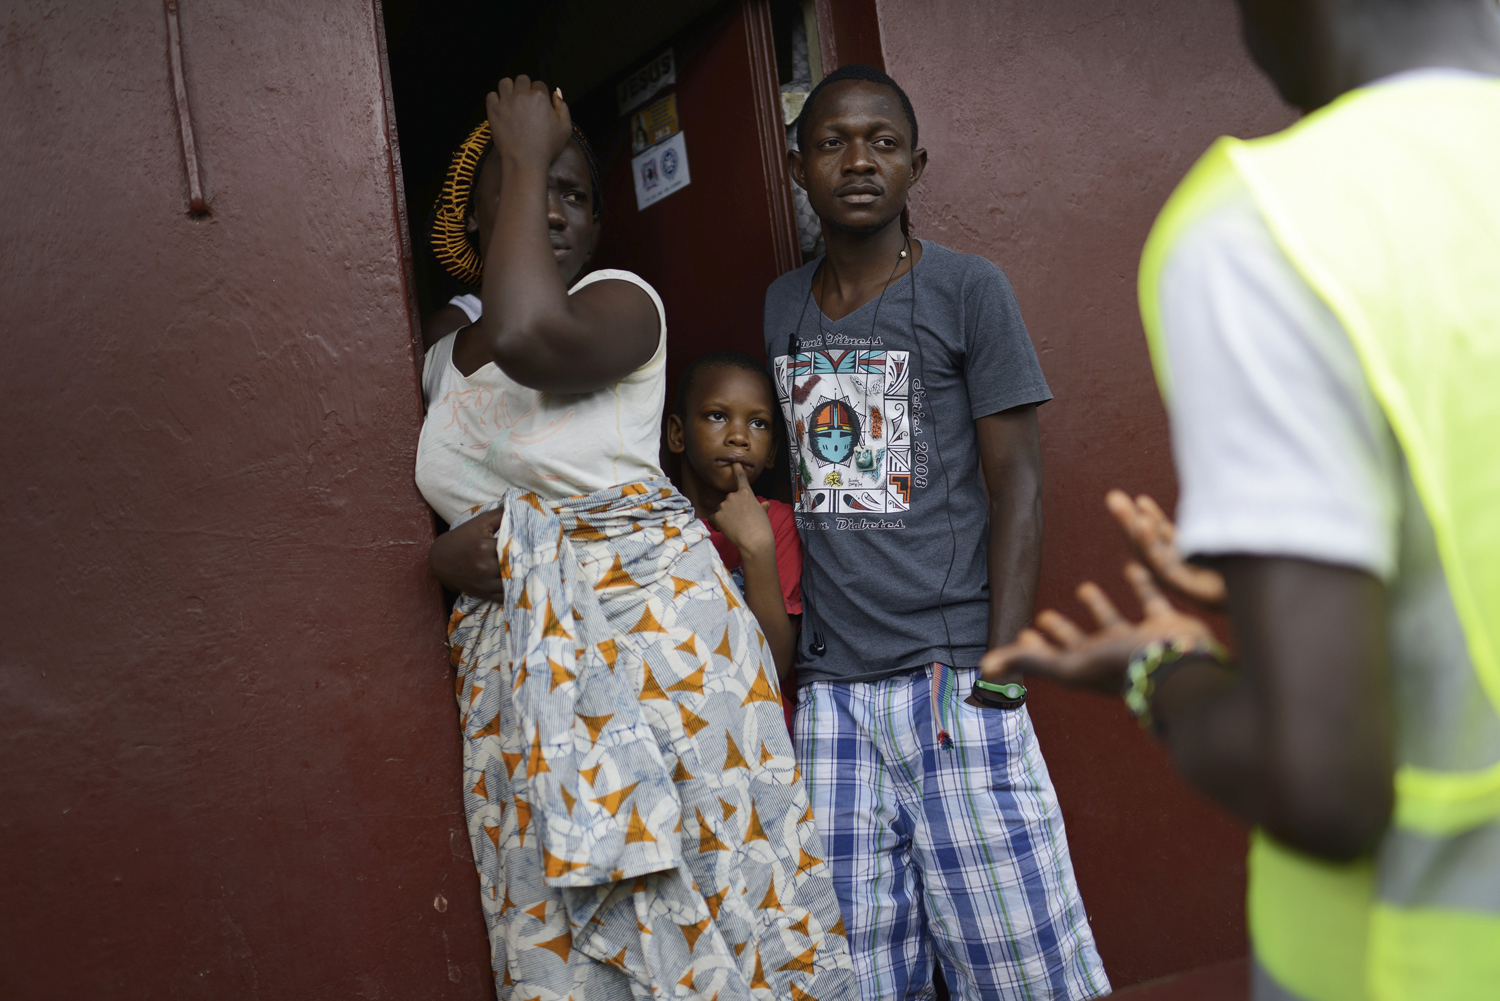 A group of volunteers inform residents about Ebola and a lockdown in the Brookfield neighborhood of Freetown, Sierra Leone, Sept. 19, 2014.